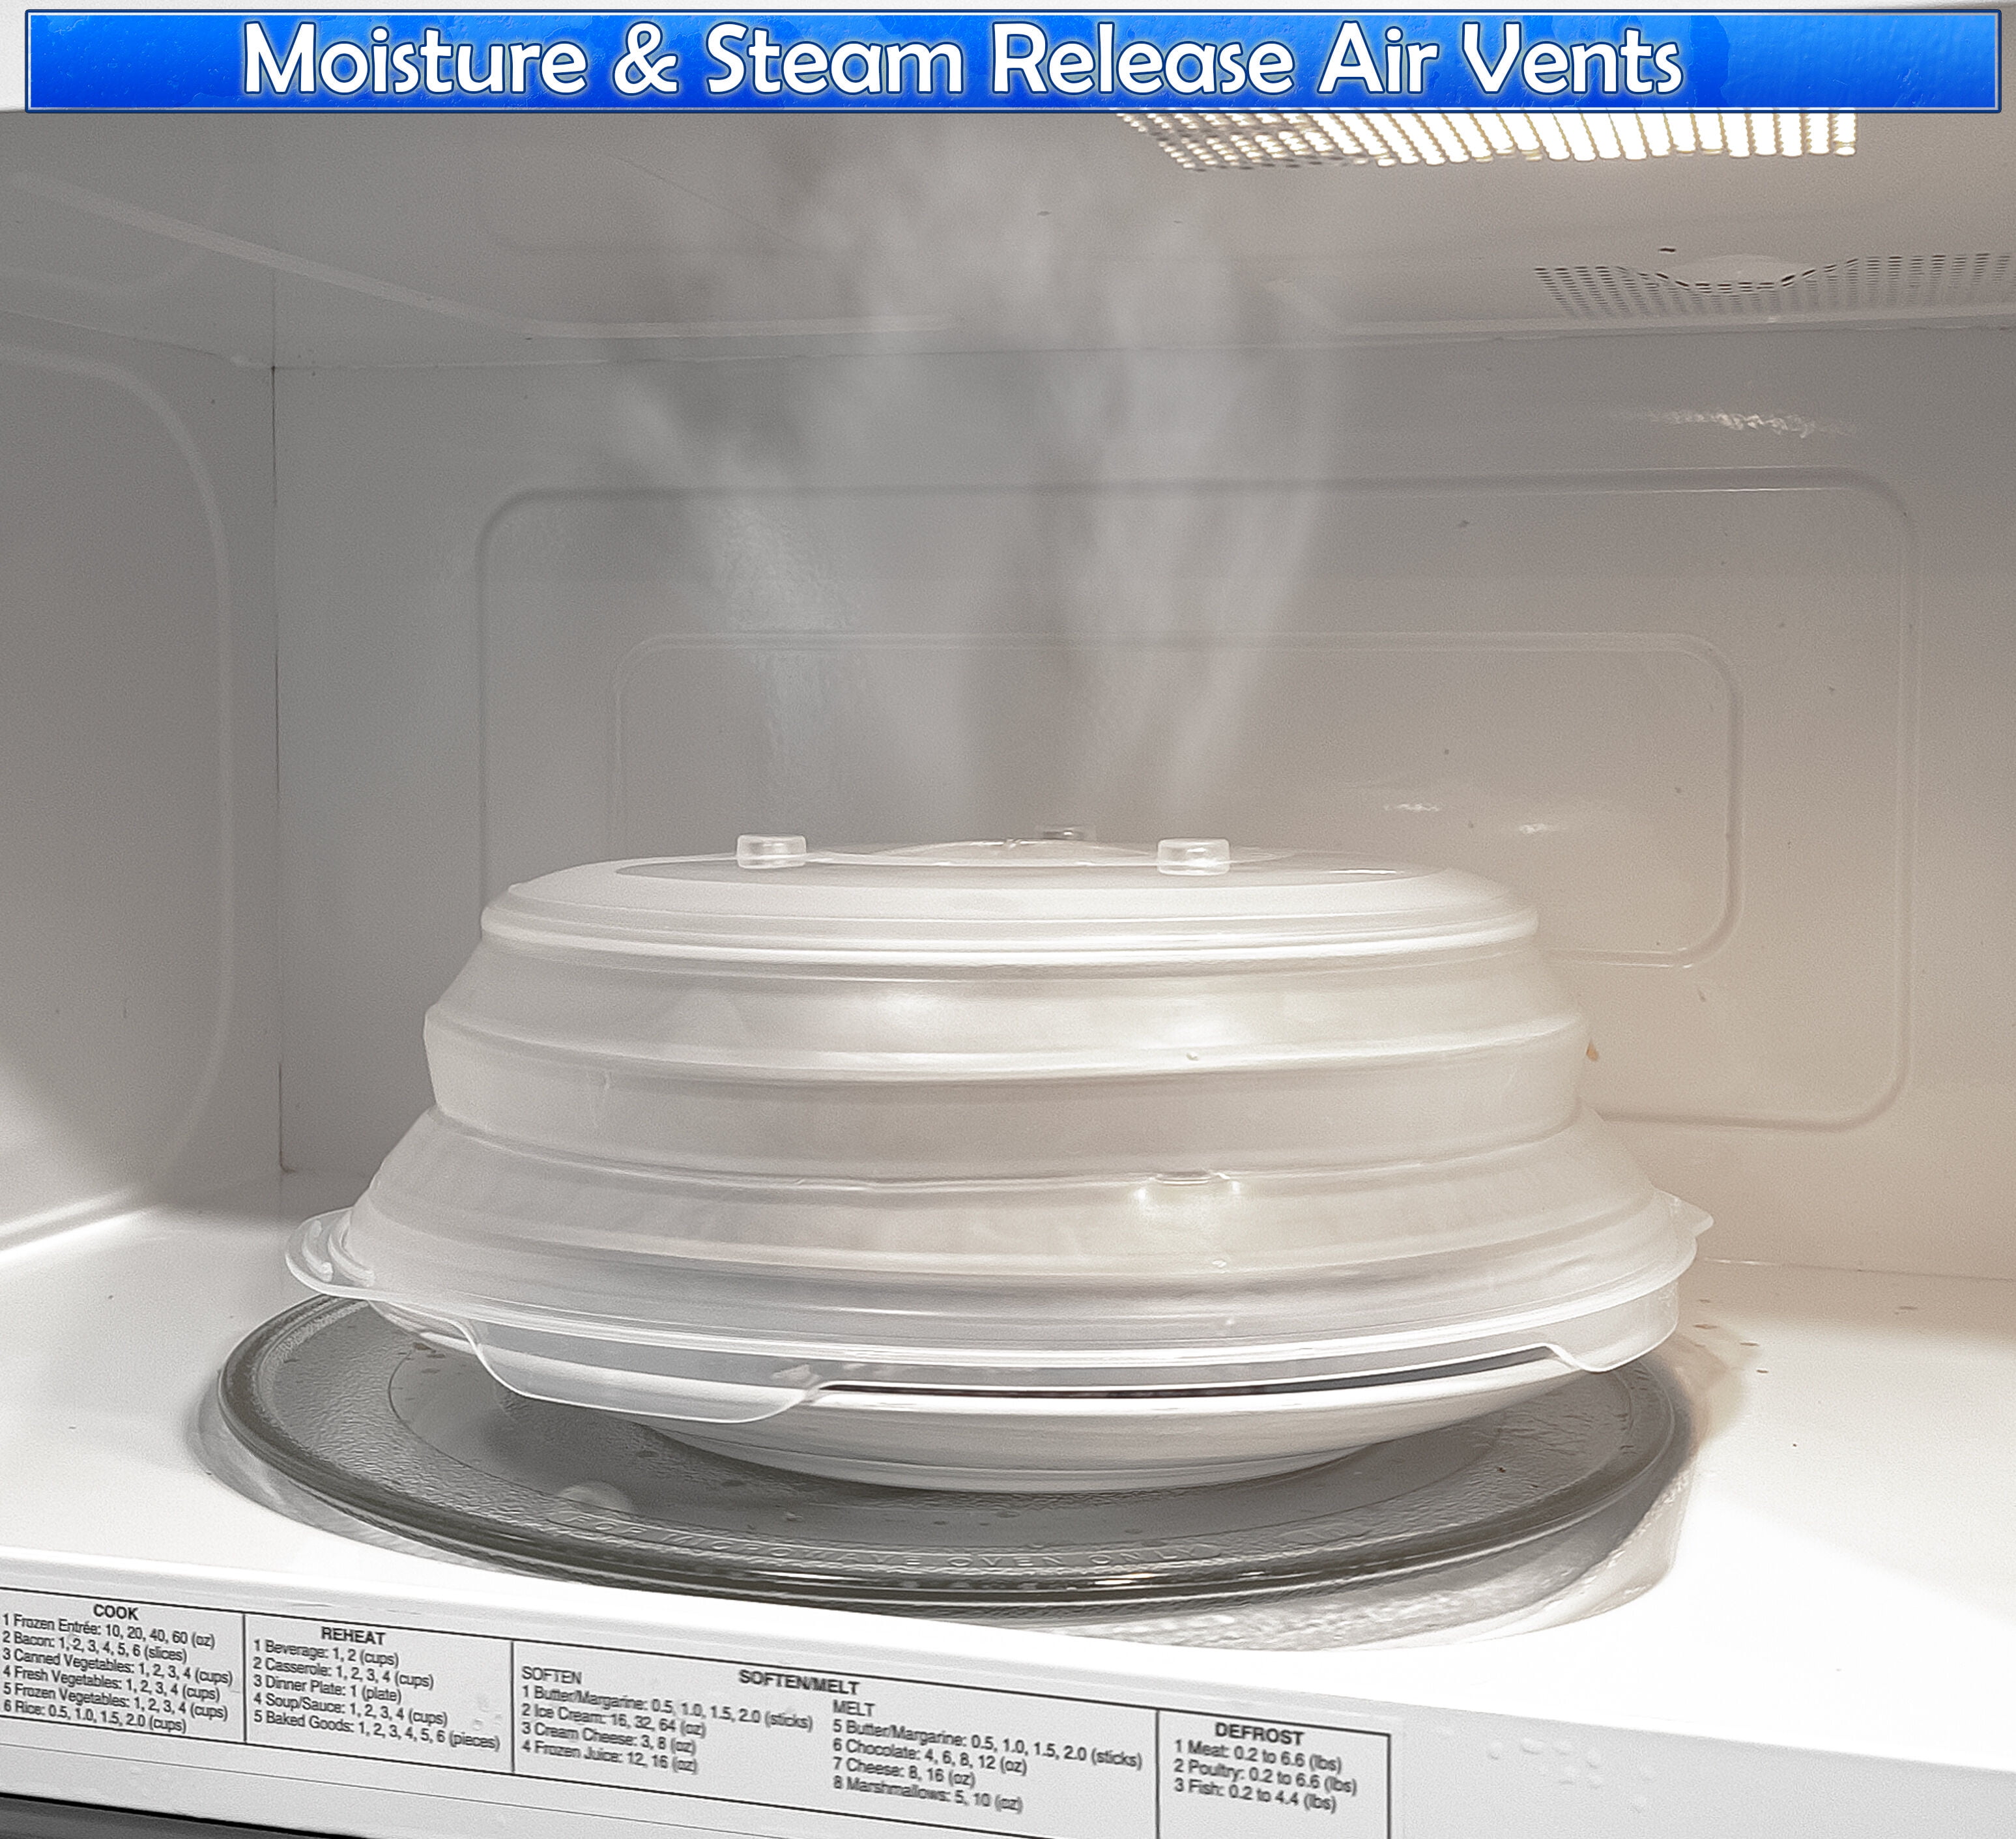 2 Microwave Hovering Anti Splattering Magnetic Food Lid Cover Guard - Microwave  Splatter Lid with Steam Vents & Microwave Safe Magnets - Dishwasher Safe &  Sticks To The Top Of Your Microwave 